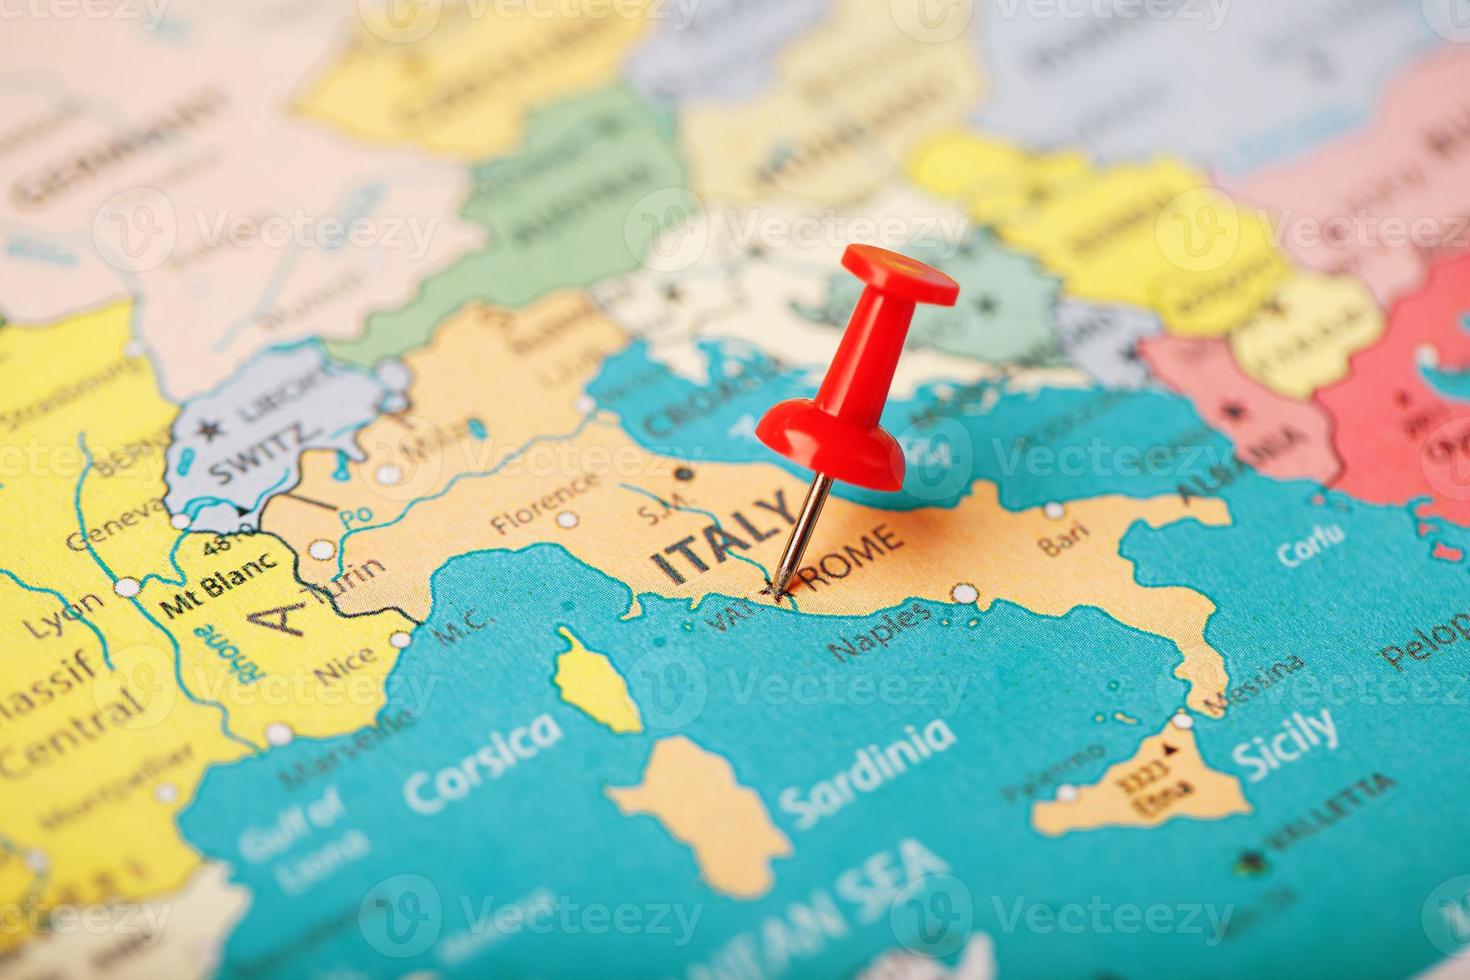 The location of the destination on the map of Italy is indicated by a red pushpin photo